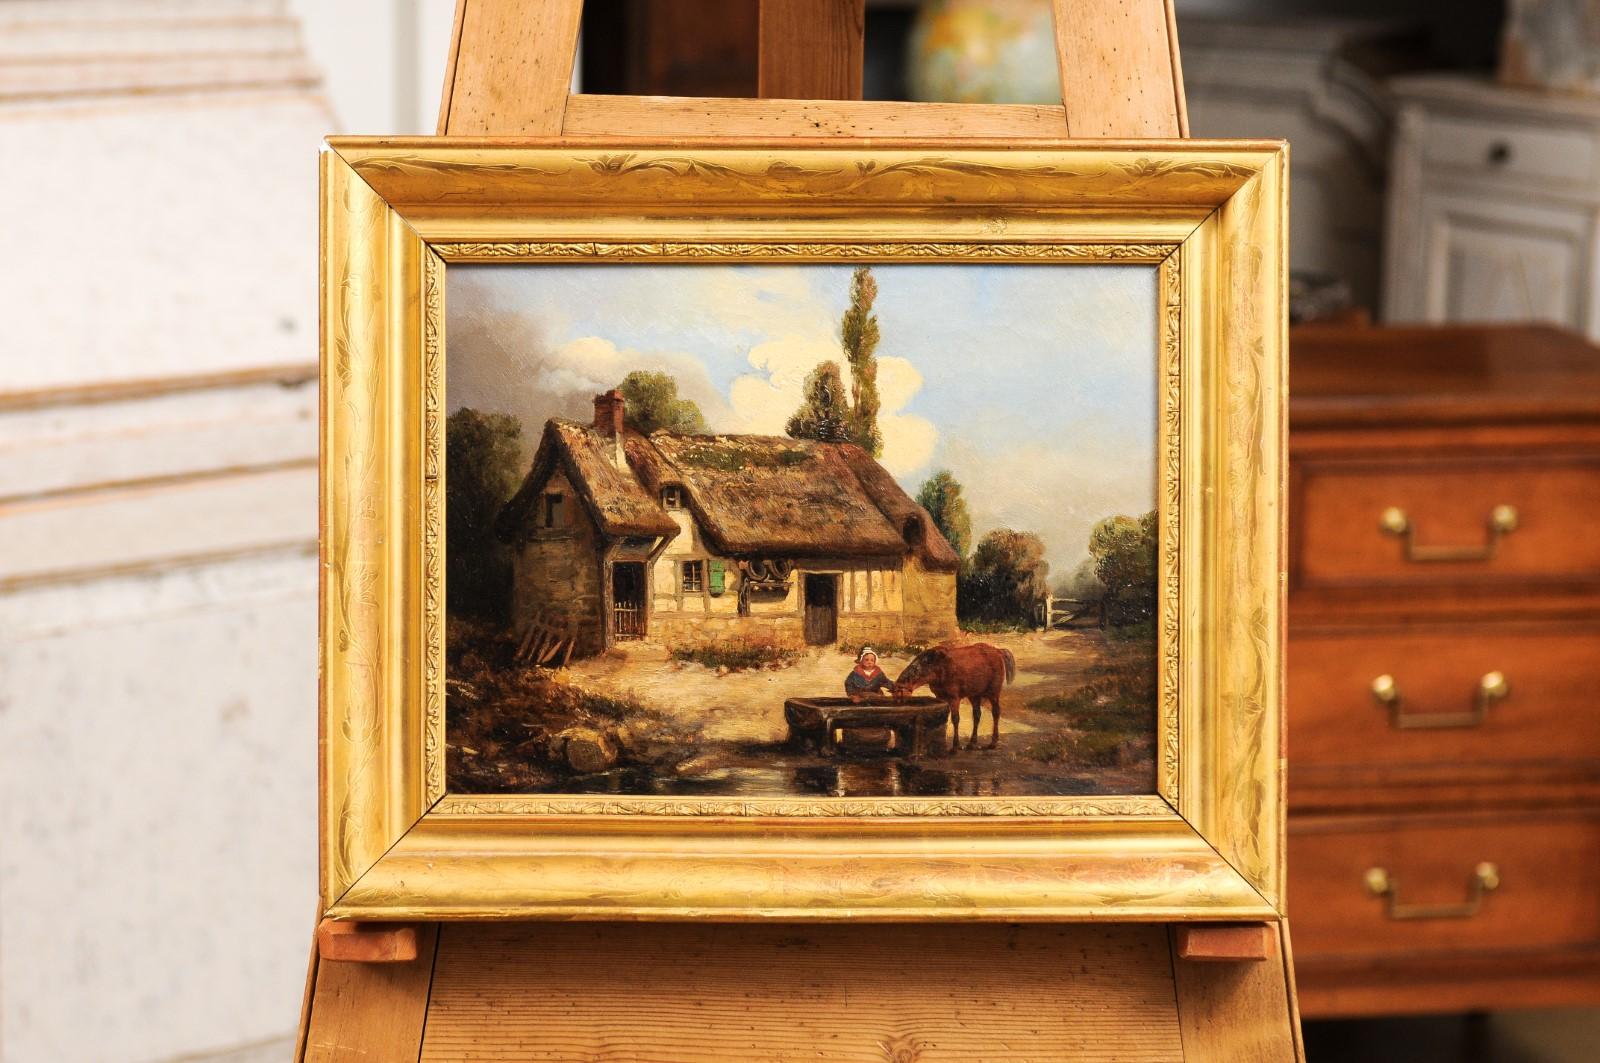 Carved French 19th Century Painting Signed Léon Bertan Depicting a Bucolic Farm Scene For Sale